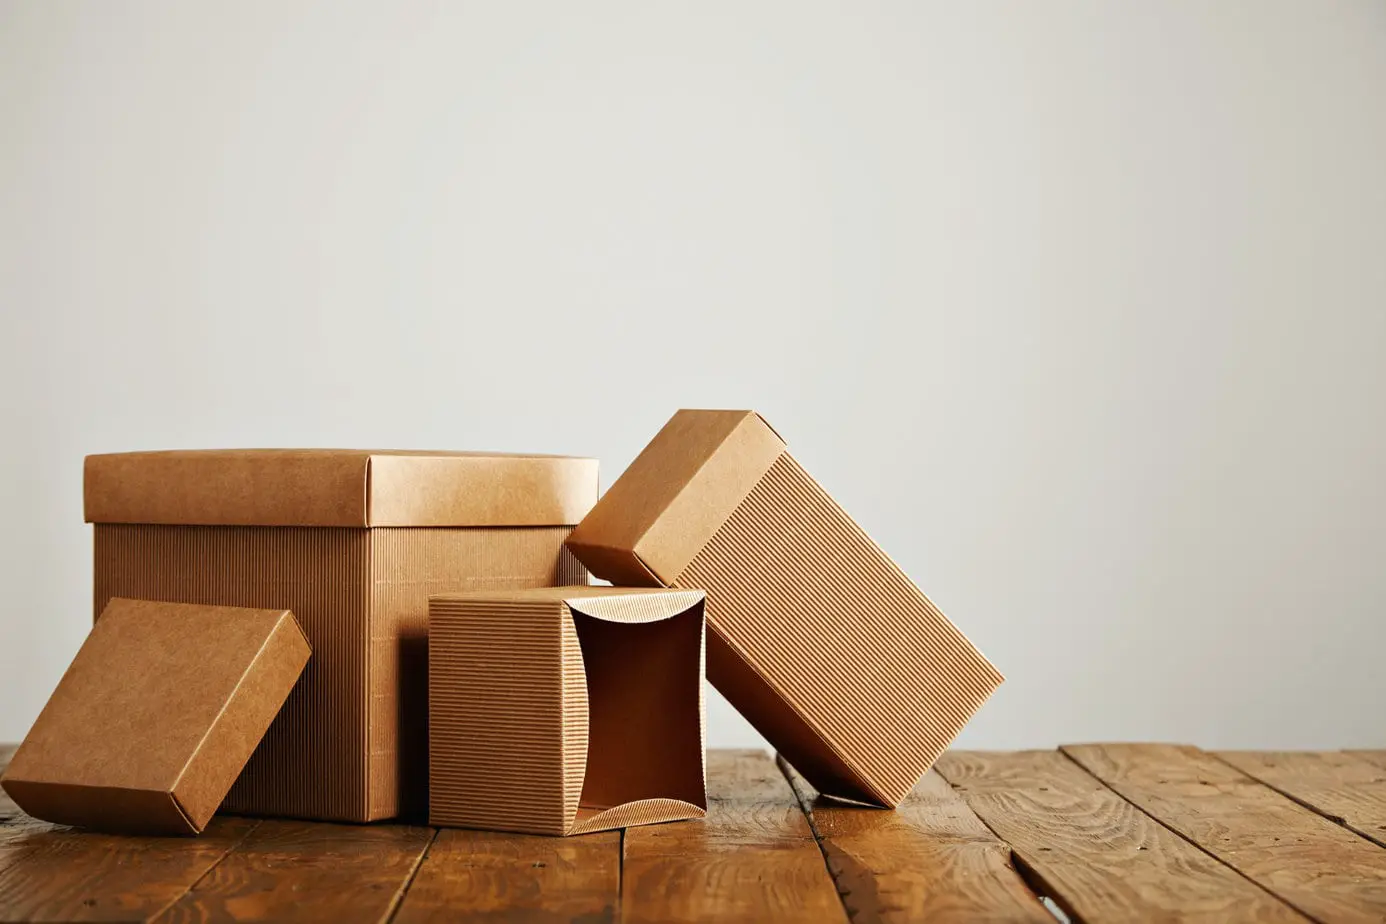 6 Reasons Why You Need To Use Shipping Boxes In 2023 001 